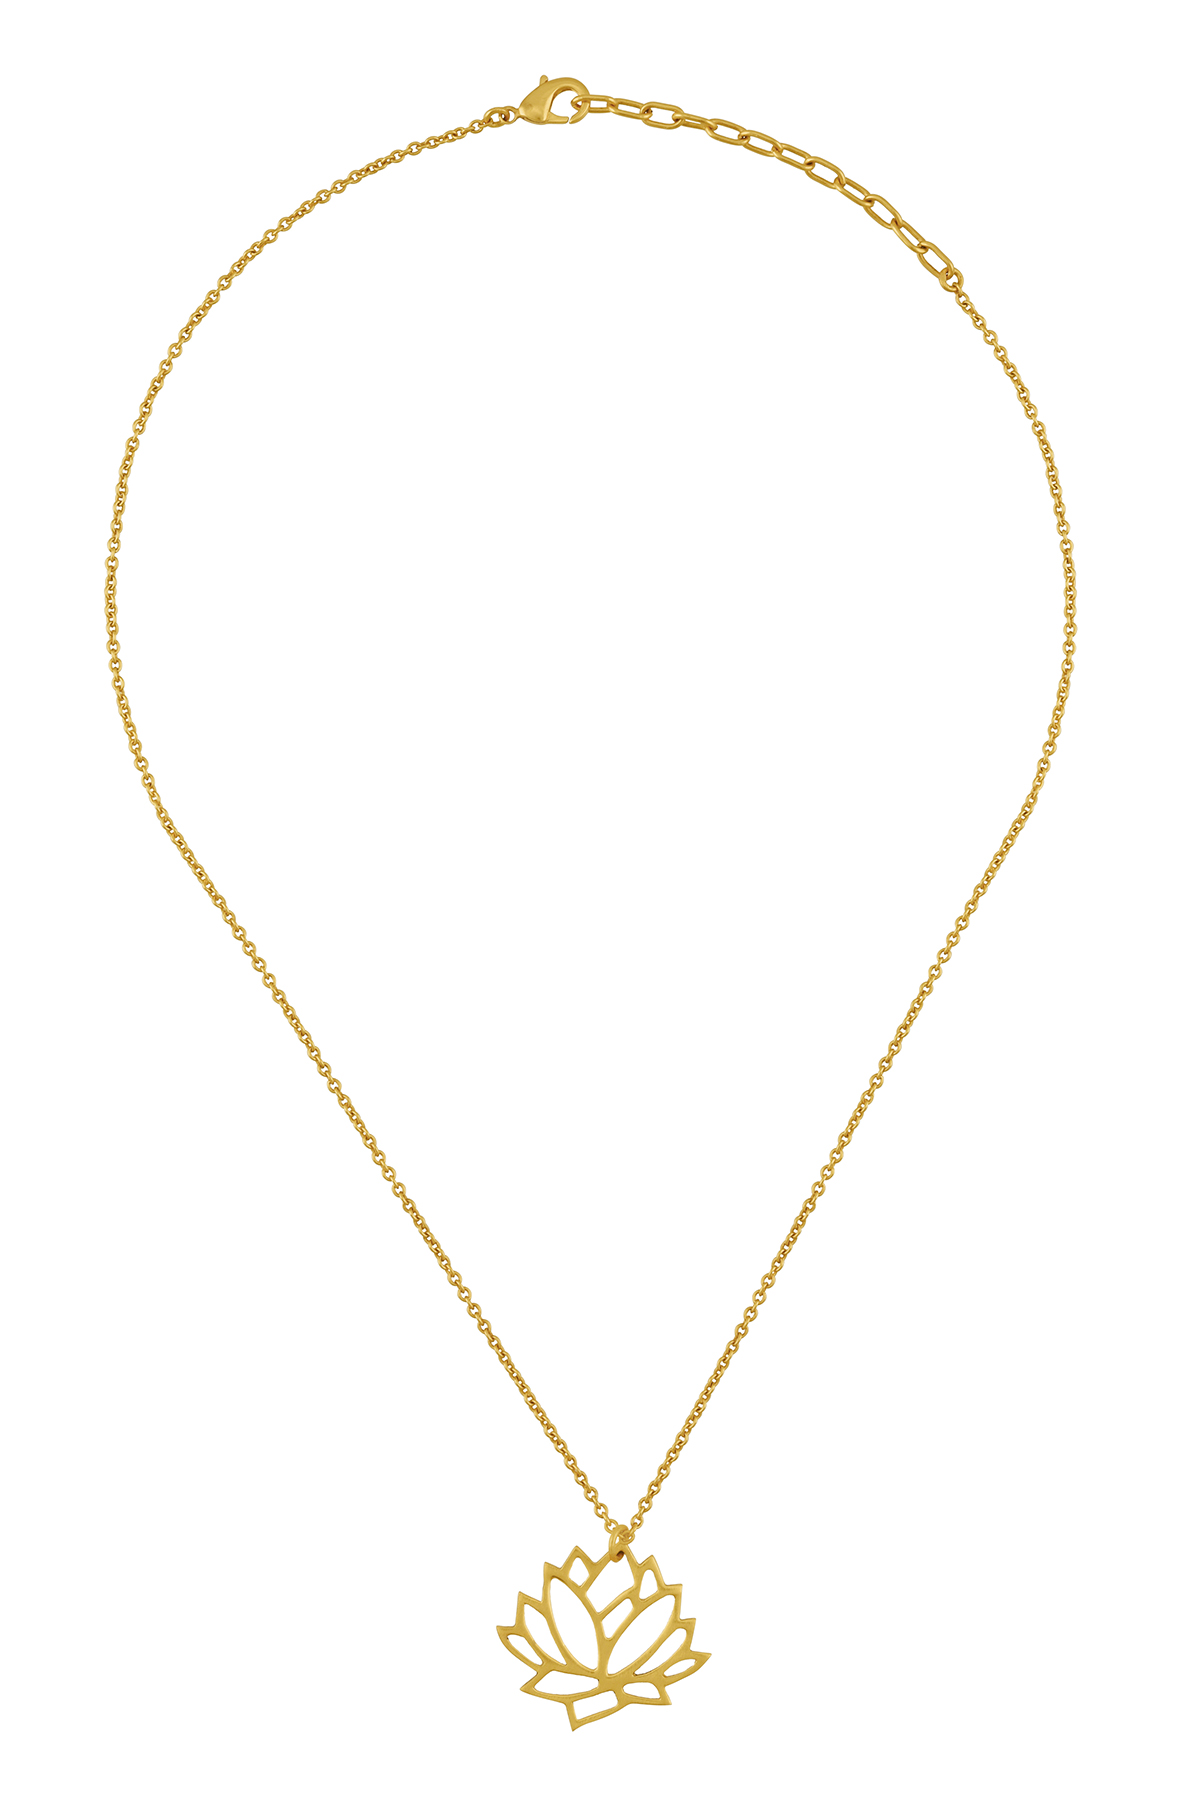 Teratai (Lotus) Necklace (Gold-Plated) – The Jewelry Project India